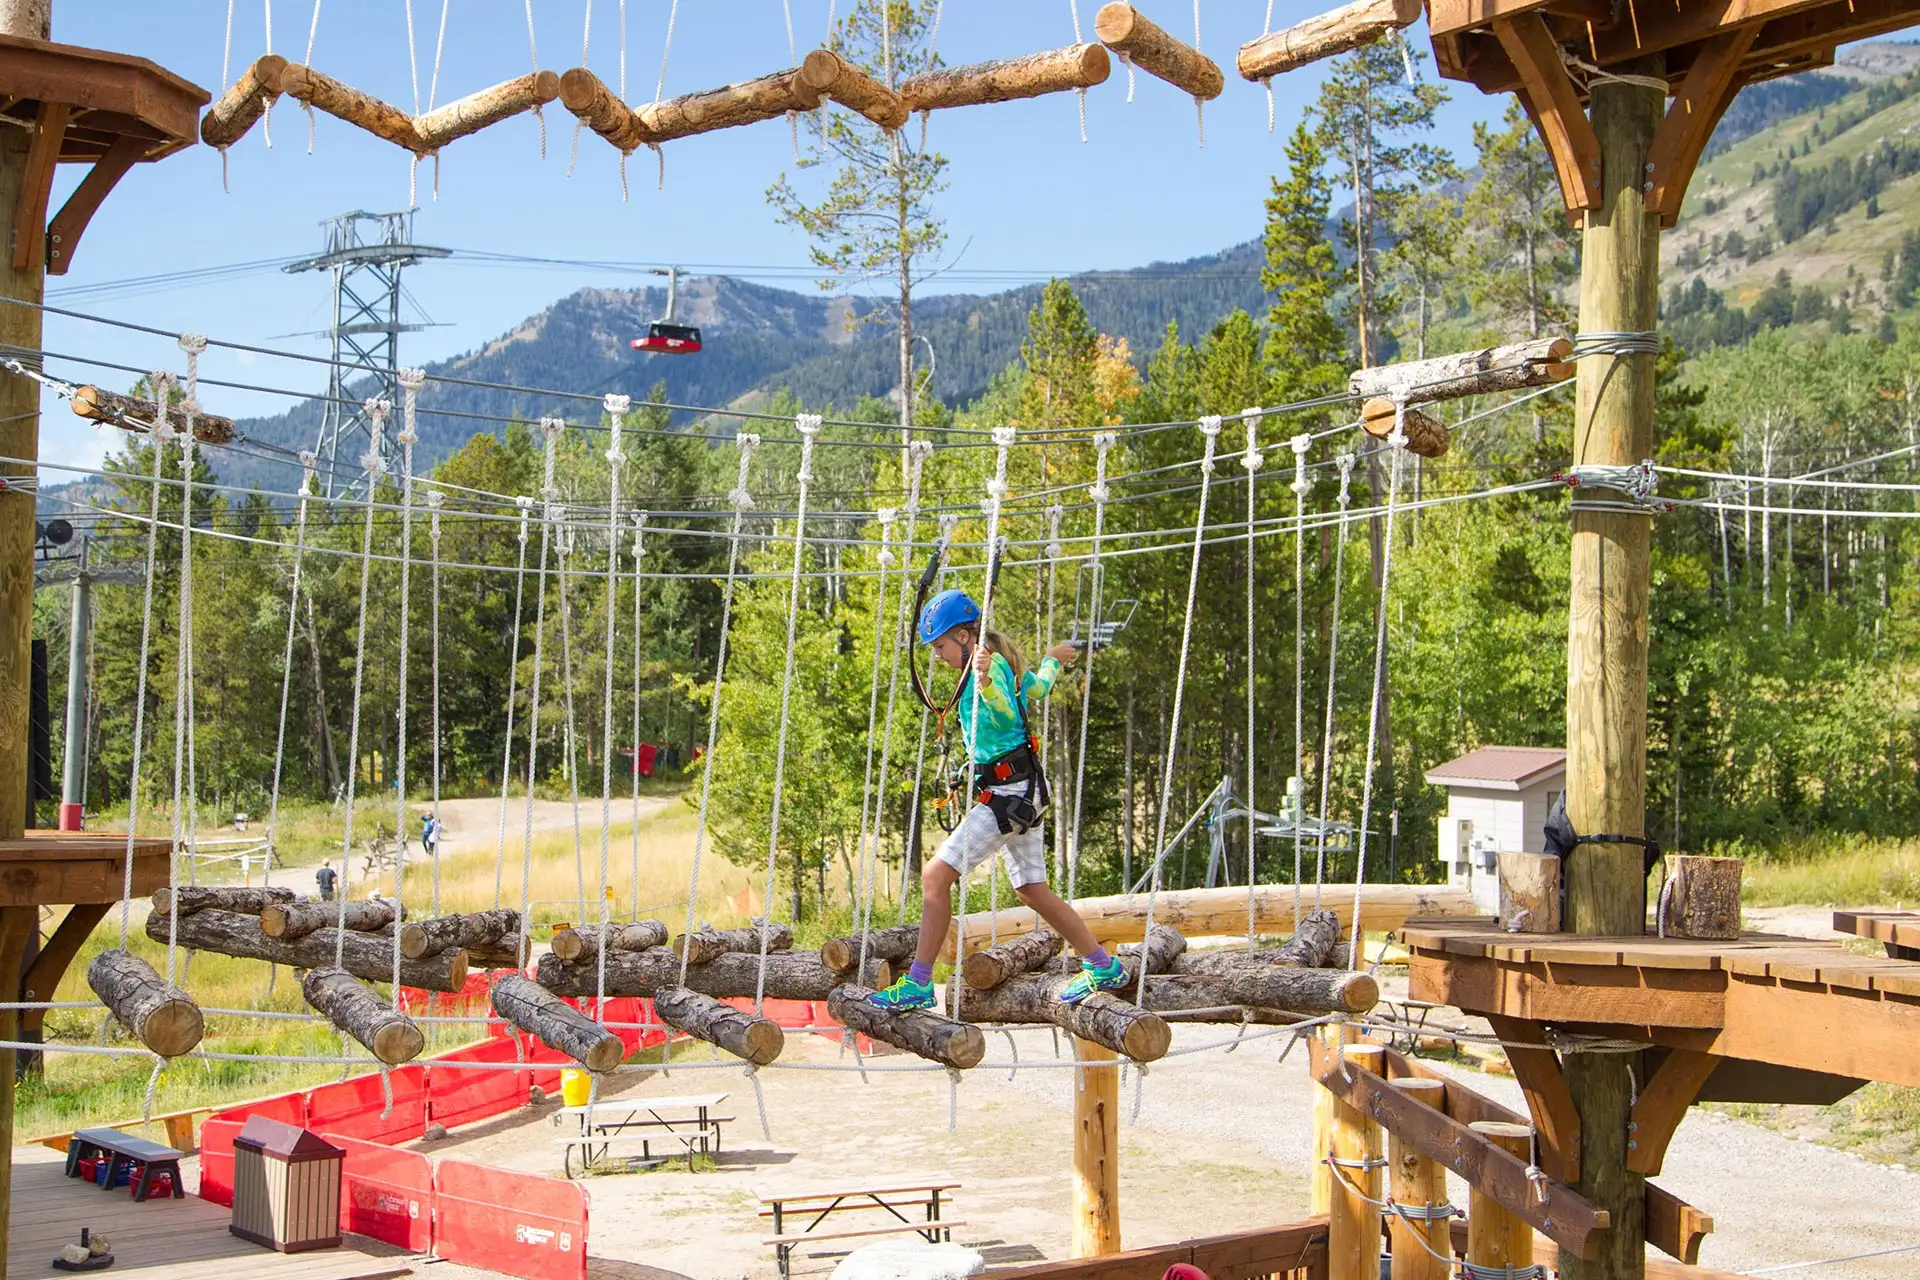 Adventure course at Jackson Hole Mountain Resort in Wyoming